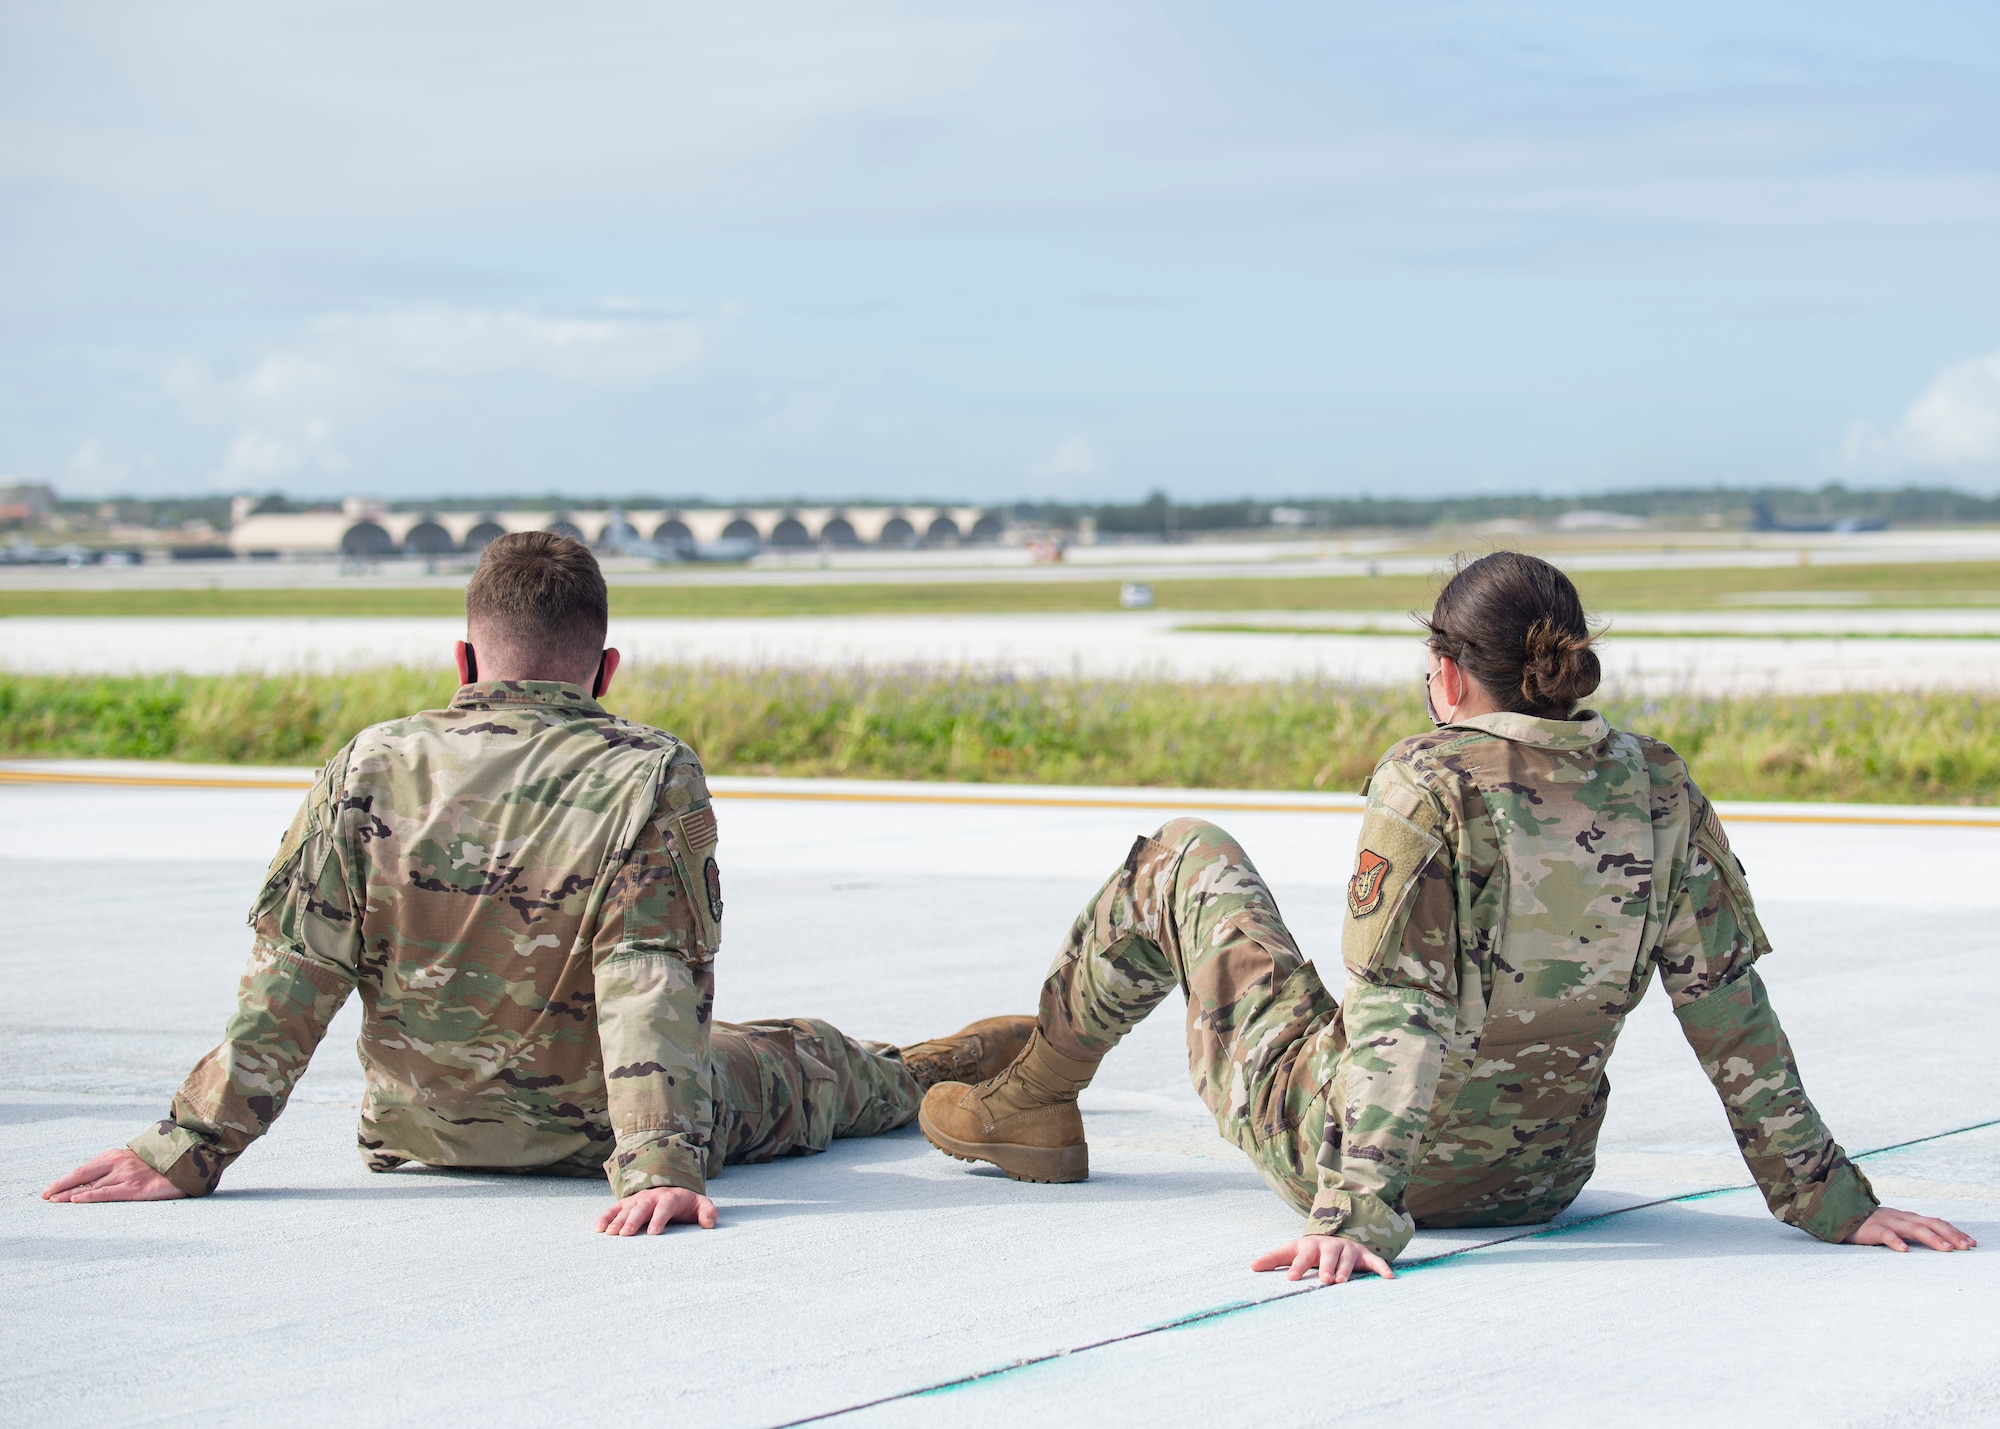 Two Airmen assigned to the 36th Maintenance Group watch aircraft take off during a group flight line engagement for Exercise Cope North 2021 at Andersen Air Force Base, Guam, Feb. 5, 2021. Exercise Cope North 2021 is an annual U.S. Pacific Air Forces joint/combined, trilateral field training exercise occurring Feb. 3-19, 2021. The exercise includes participants from the U.S. Air Force, U.S. Navy, U.S. Marine Corps, Japan Air Self-Defense Force and Royal Australian Air Force. (U.S. Air Force photo by Senior Airman Aubree Owens)